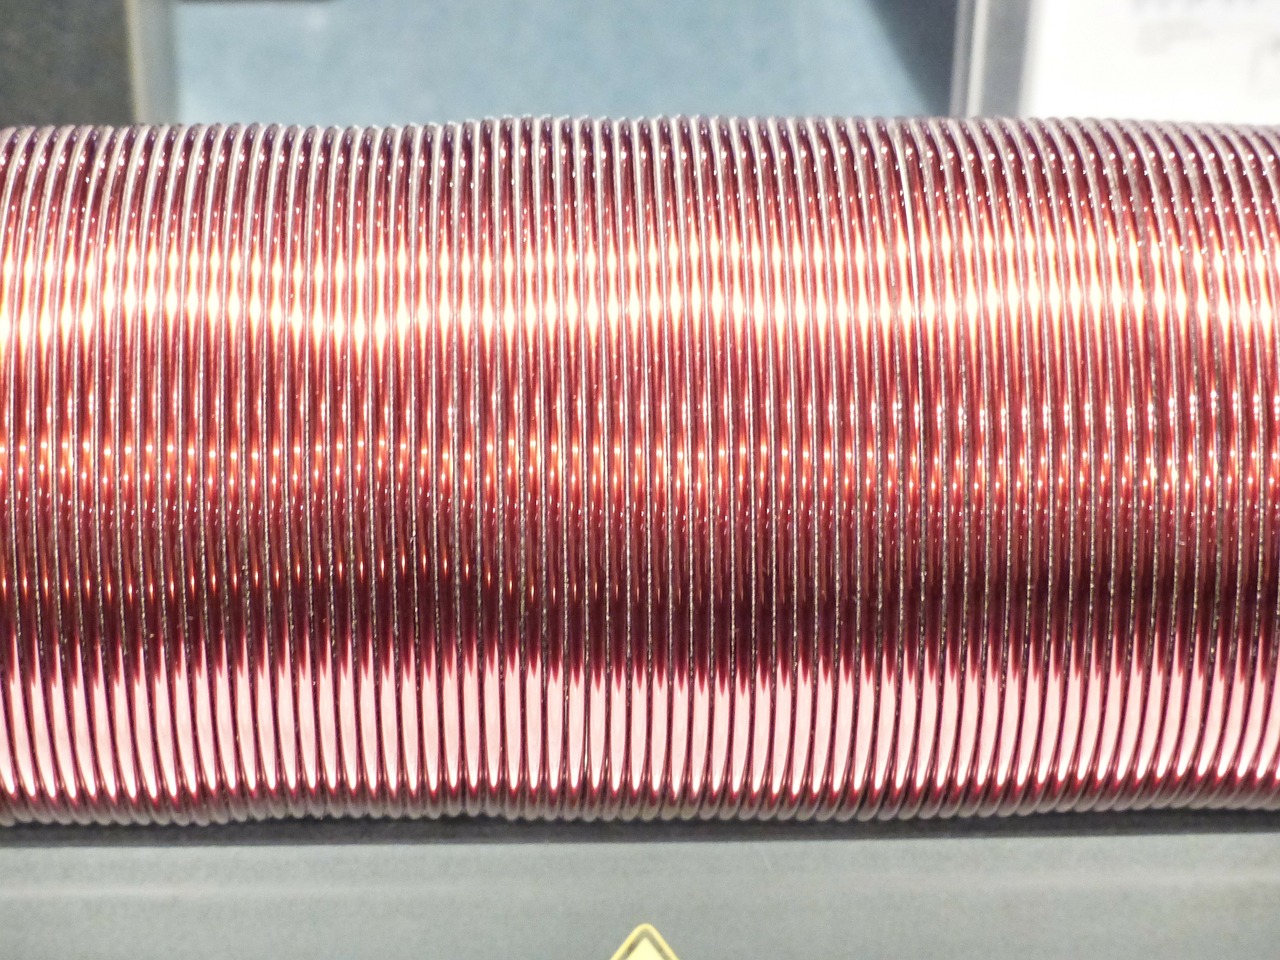 copper wire coil magnetic field free photo